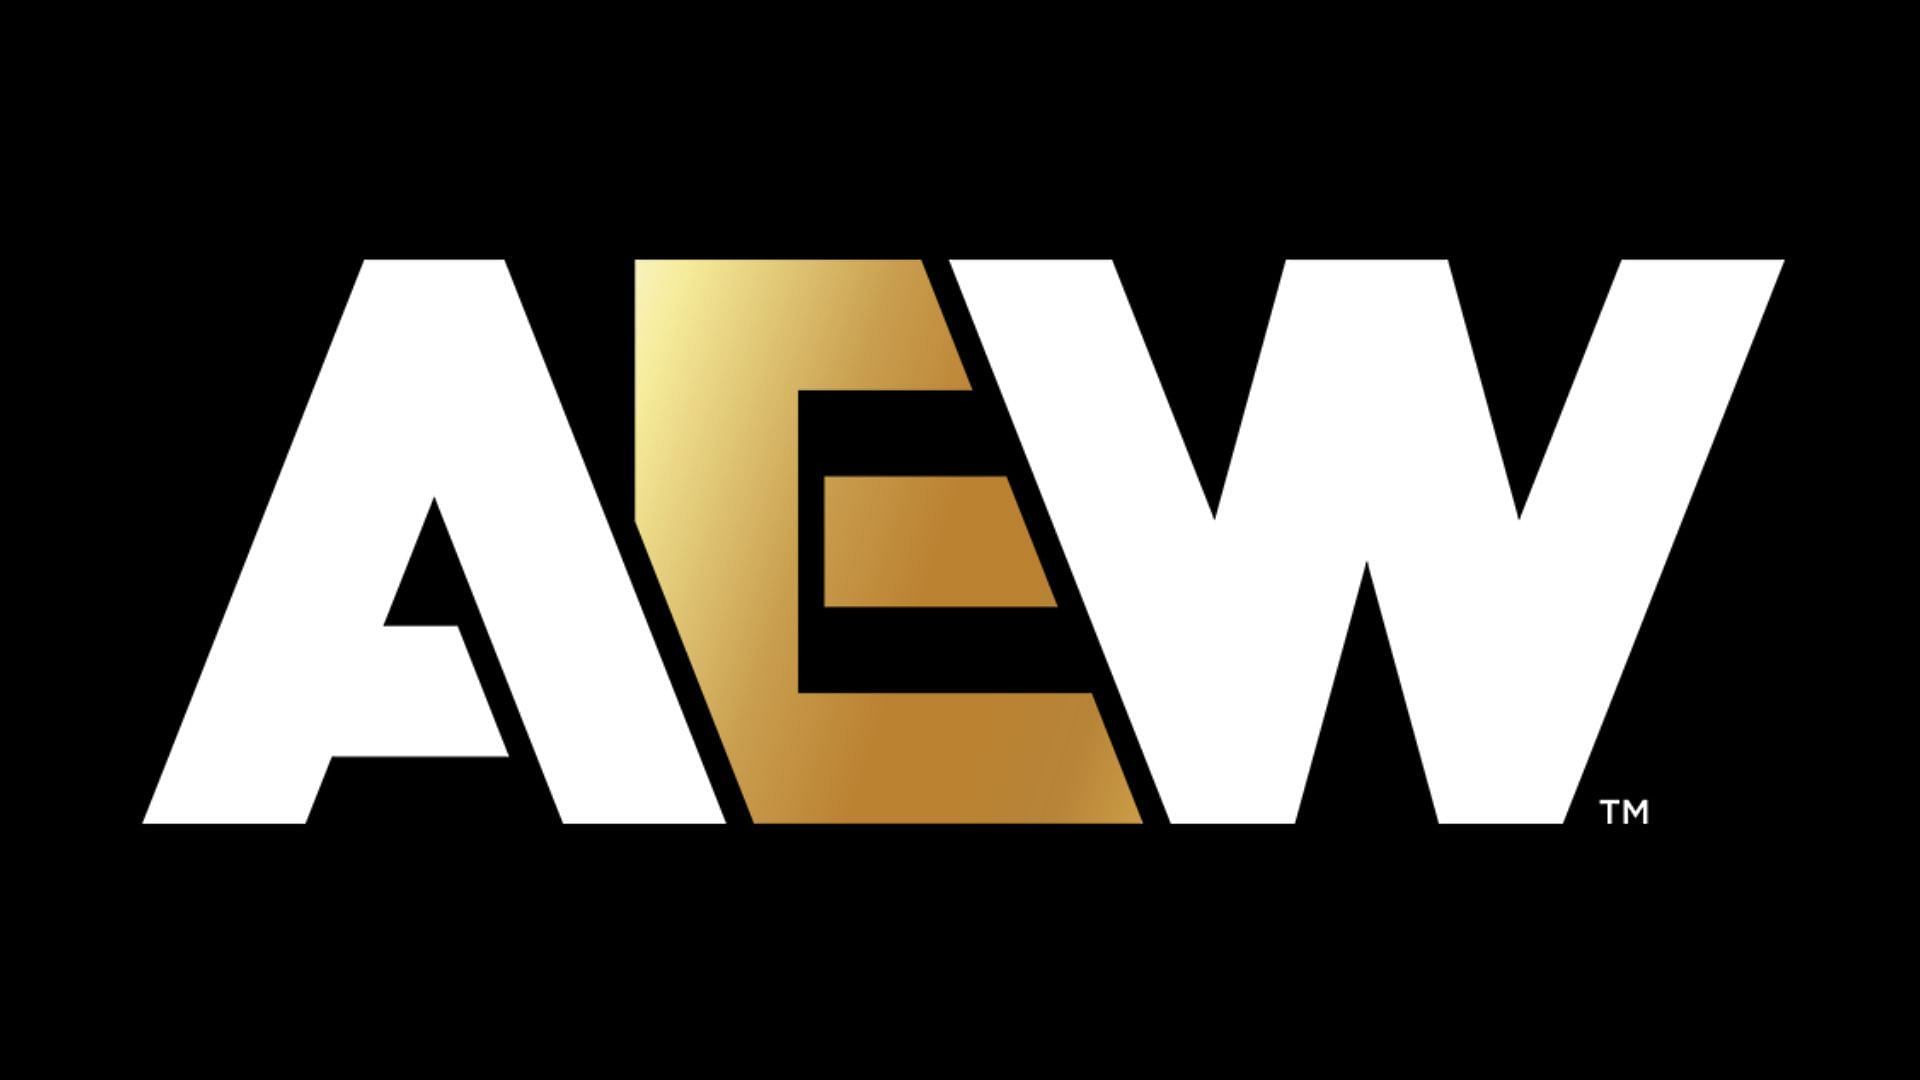 All Elite Wrestling is a Jacksonville-based promotion led by Tony Khan [logo courtesy of their official website]